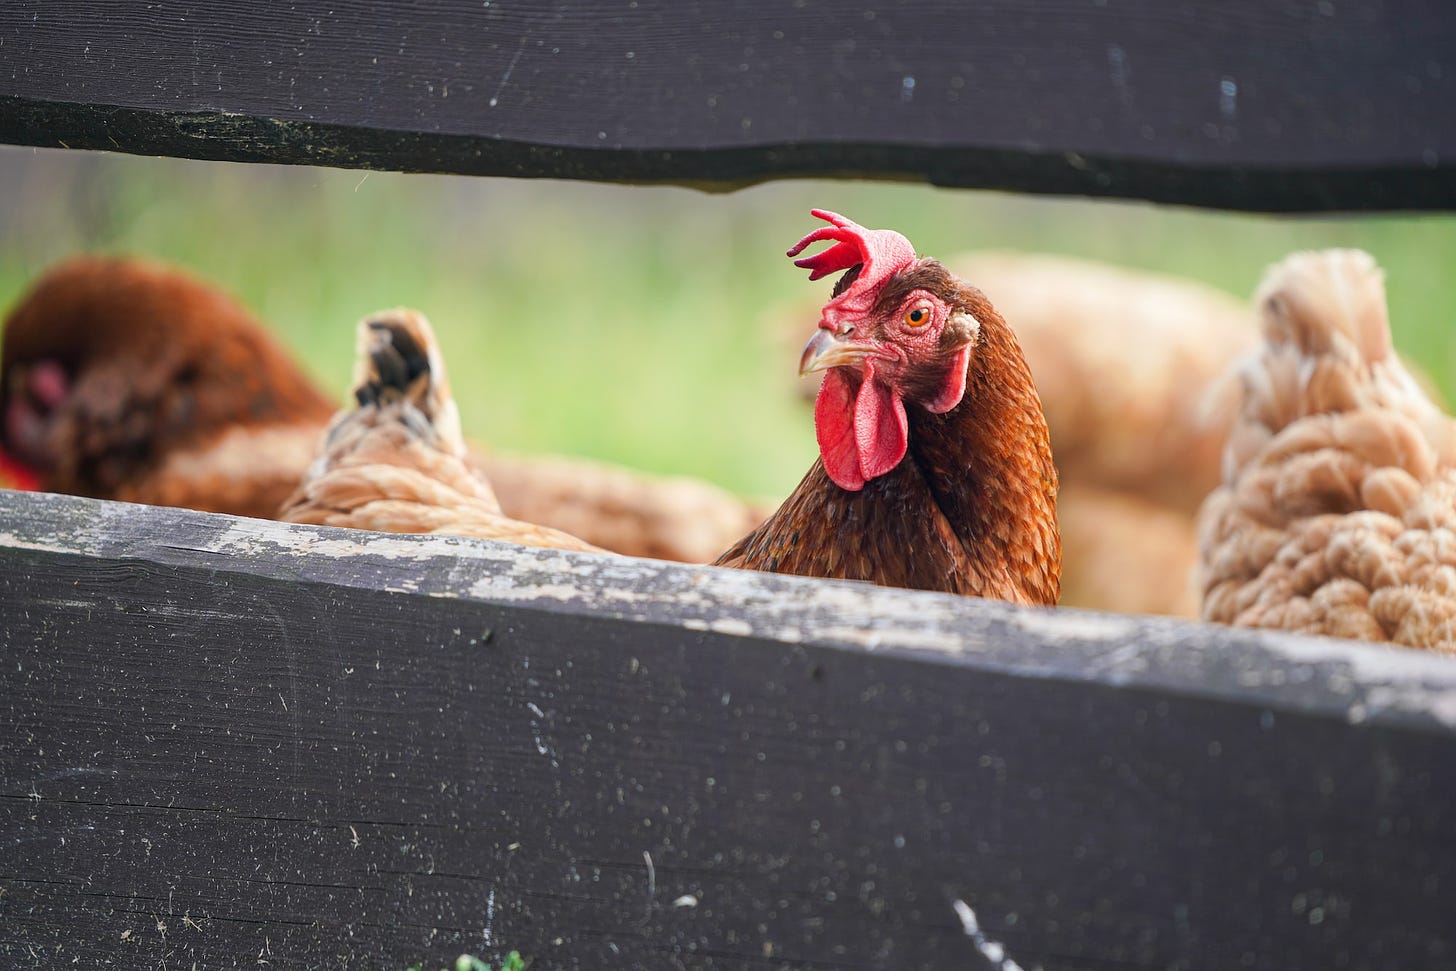 Roosting chickens, a lot of big news, and some foot piano